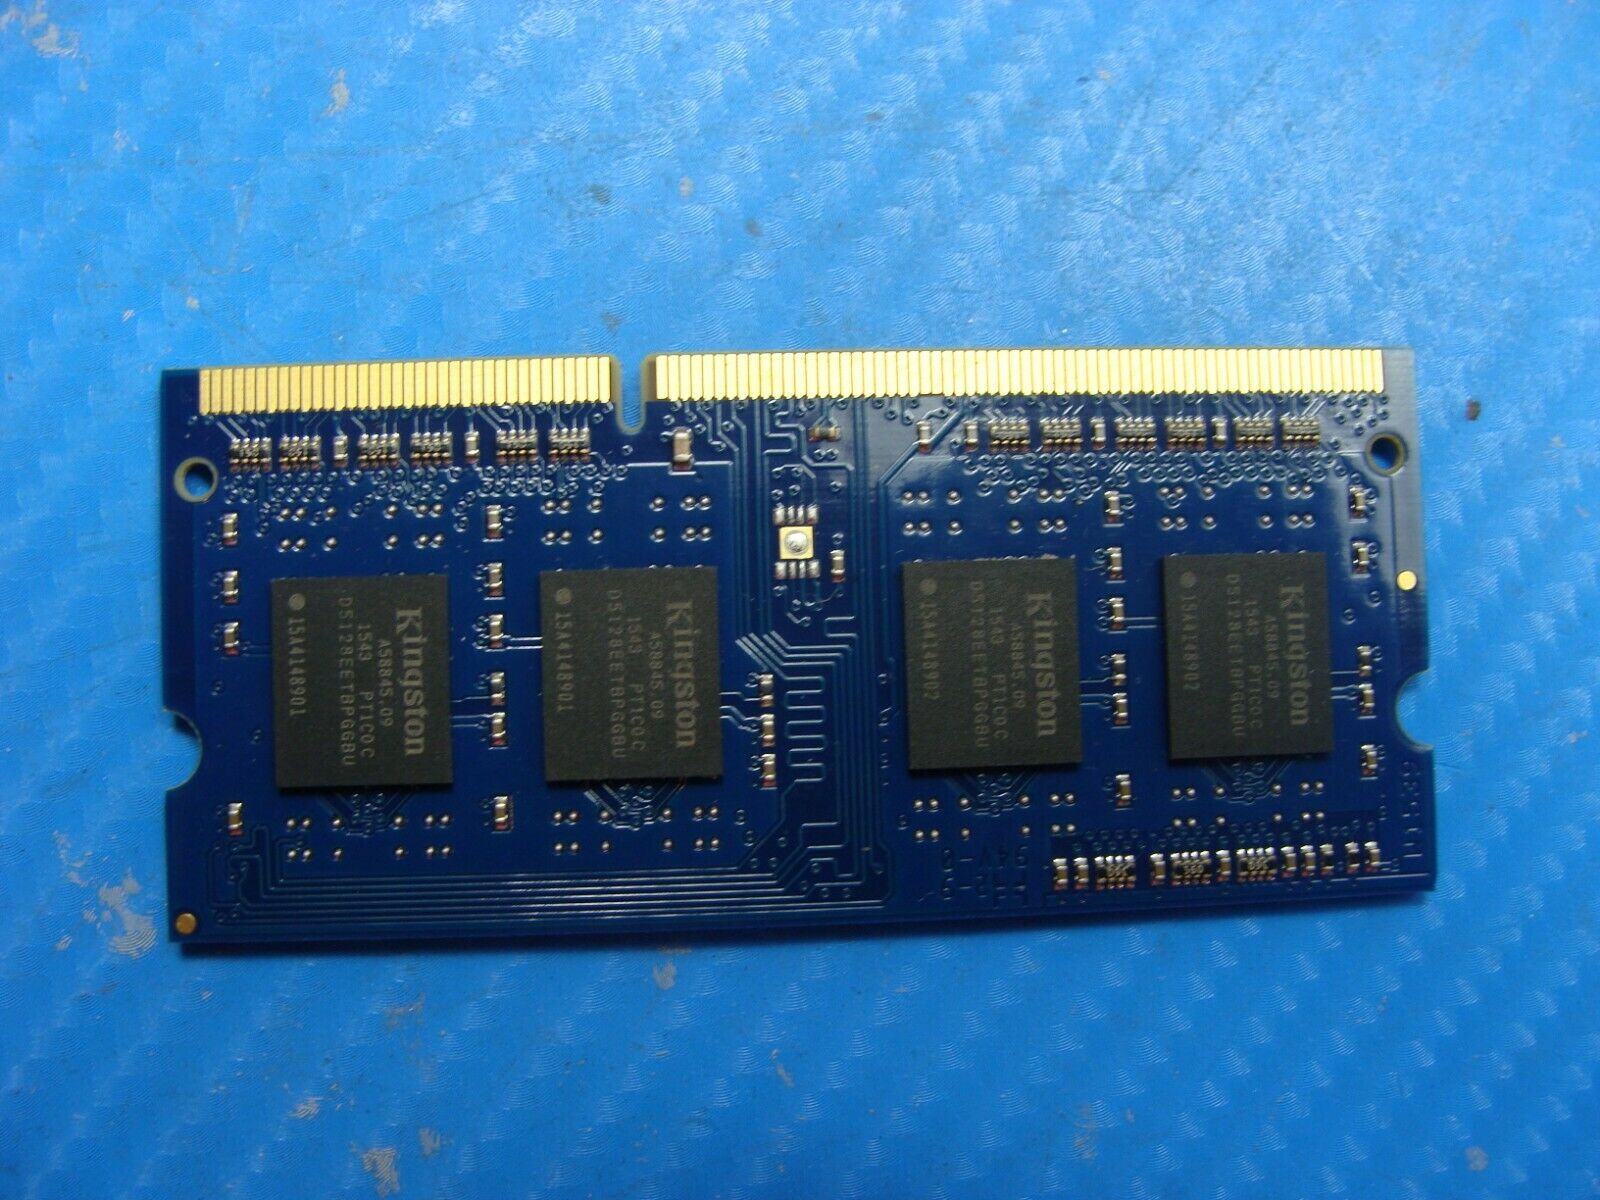 Dell 5558 Kingston 4GB Memory RAM SO-DIMM PC3L-12800S 9995417-156.A00G - Laptop Parts - Buy Authentic Computer Parts - Top Seller Ebay